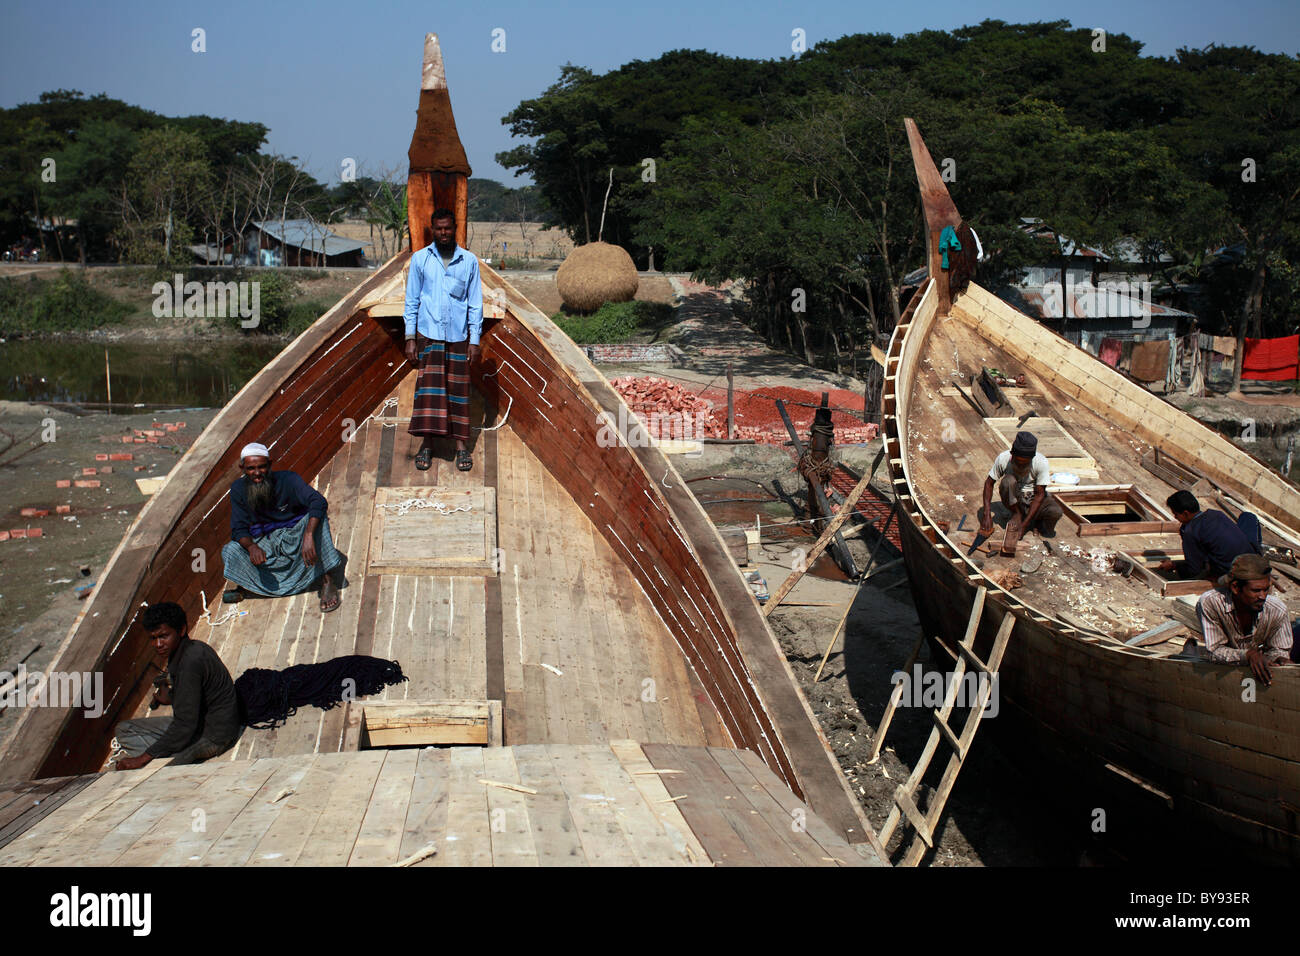 The wooden boat builders of Bangladesh Asia Stock Photo